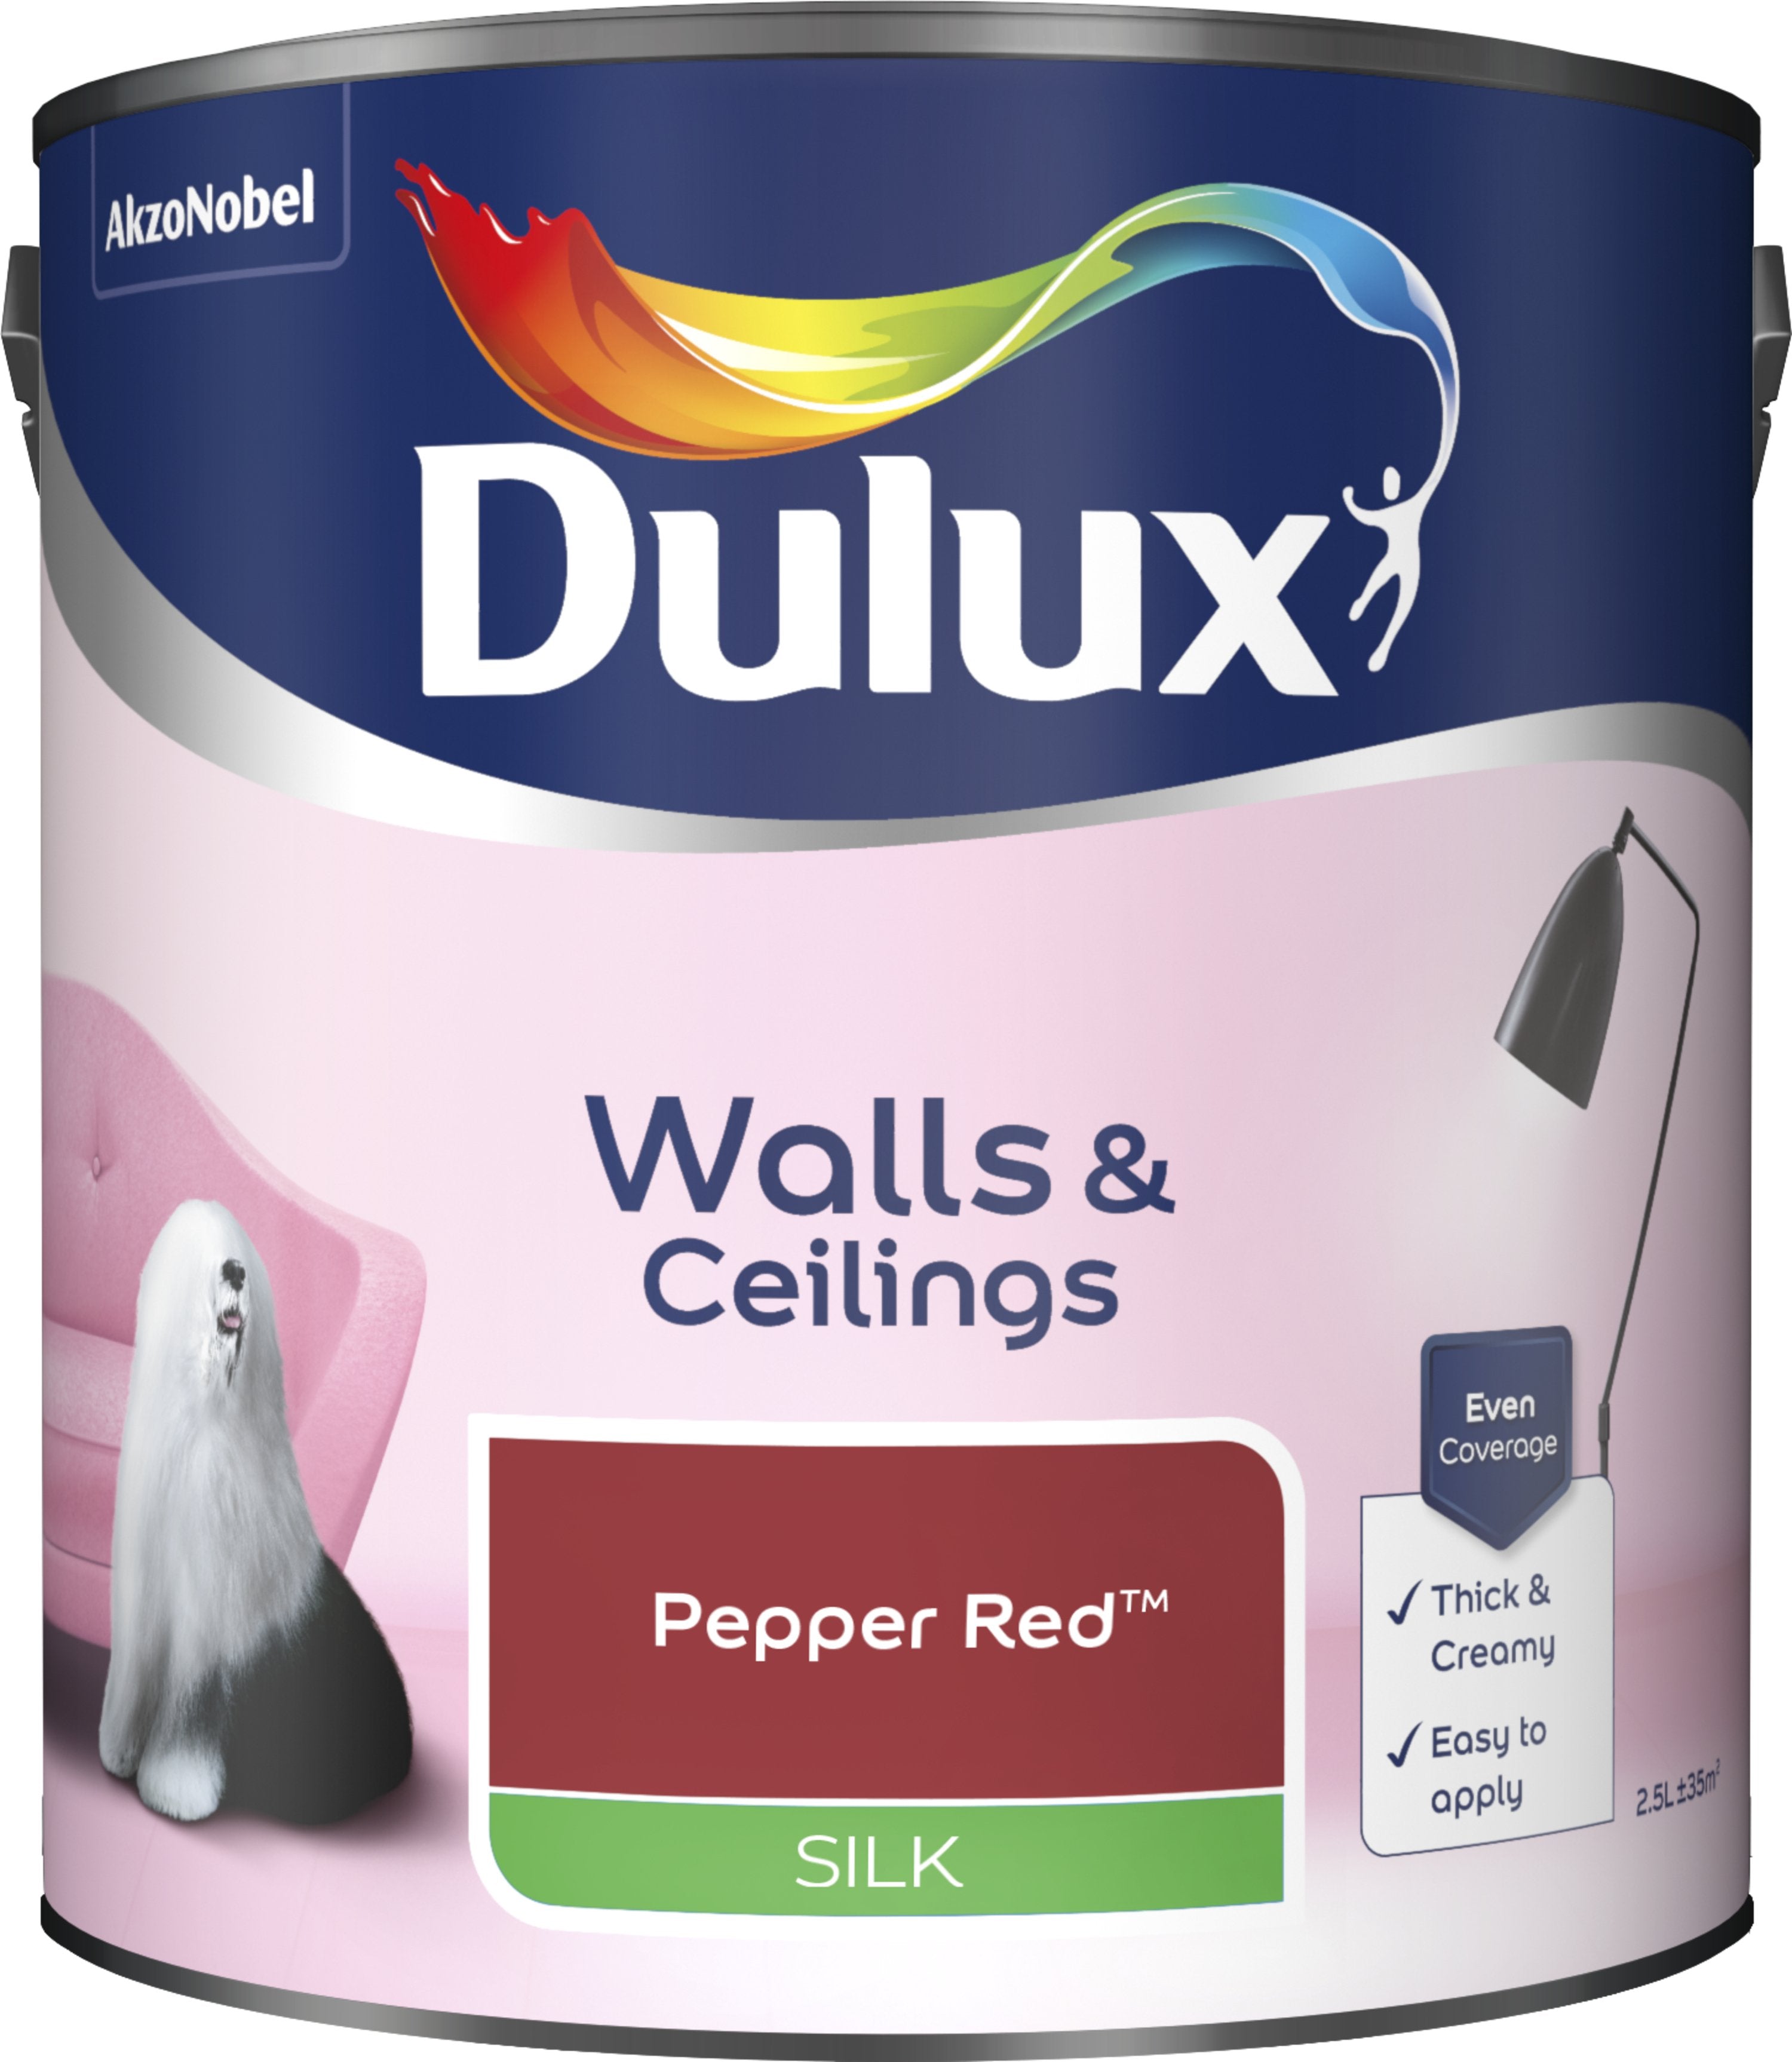 Dulux Silk Emulsion Paint For Walls And Ceilings - Pepper Red 2.5L Garden & Diy  Home Improvements  